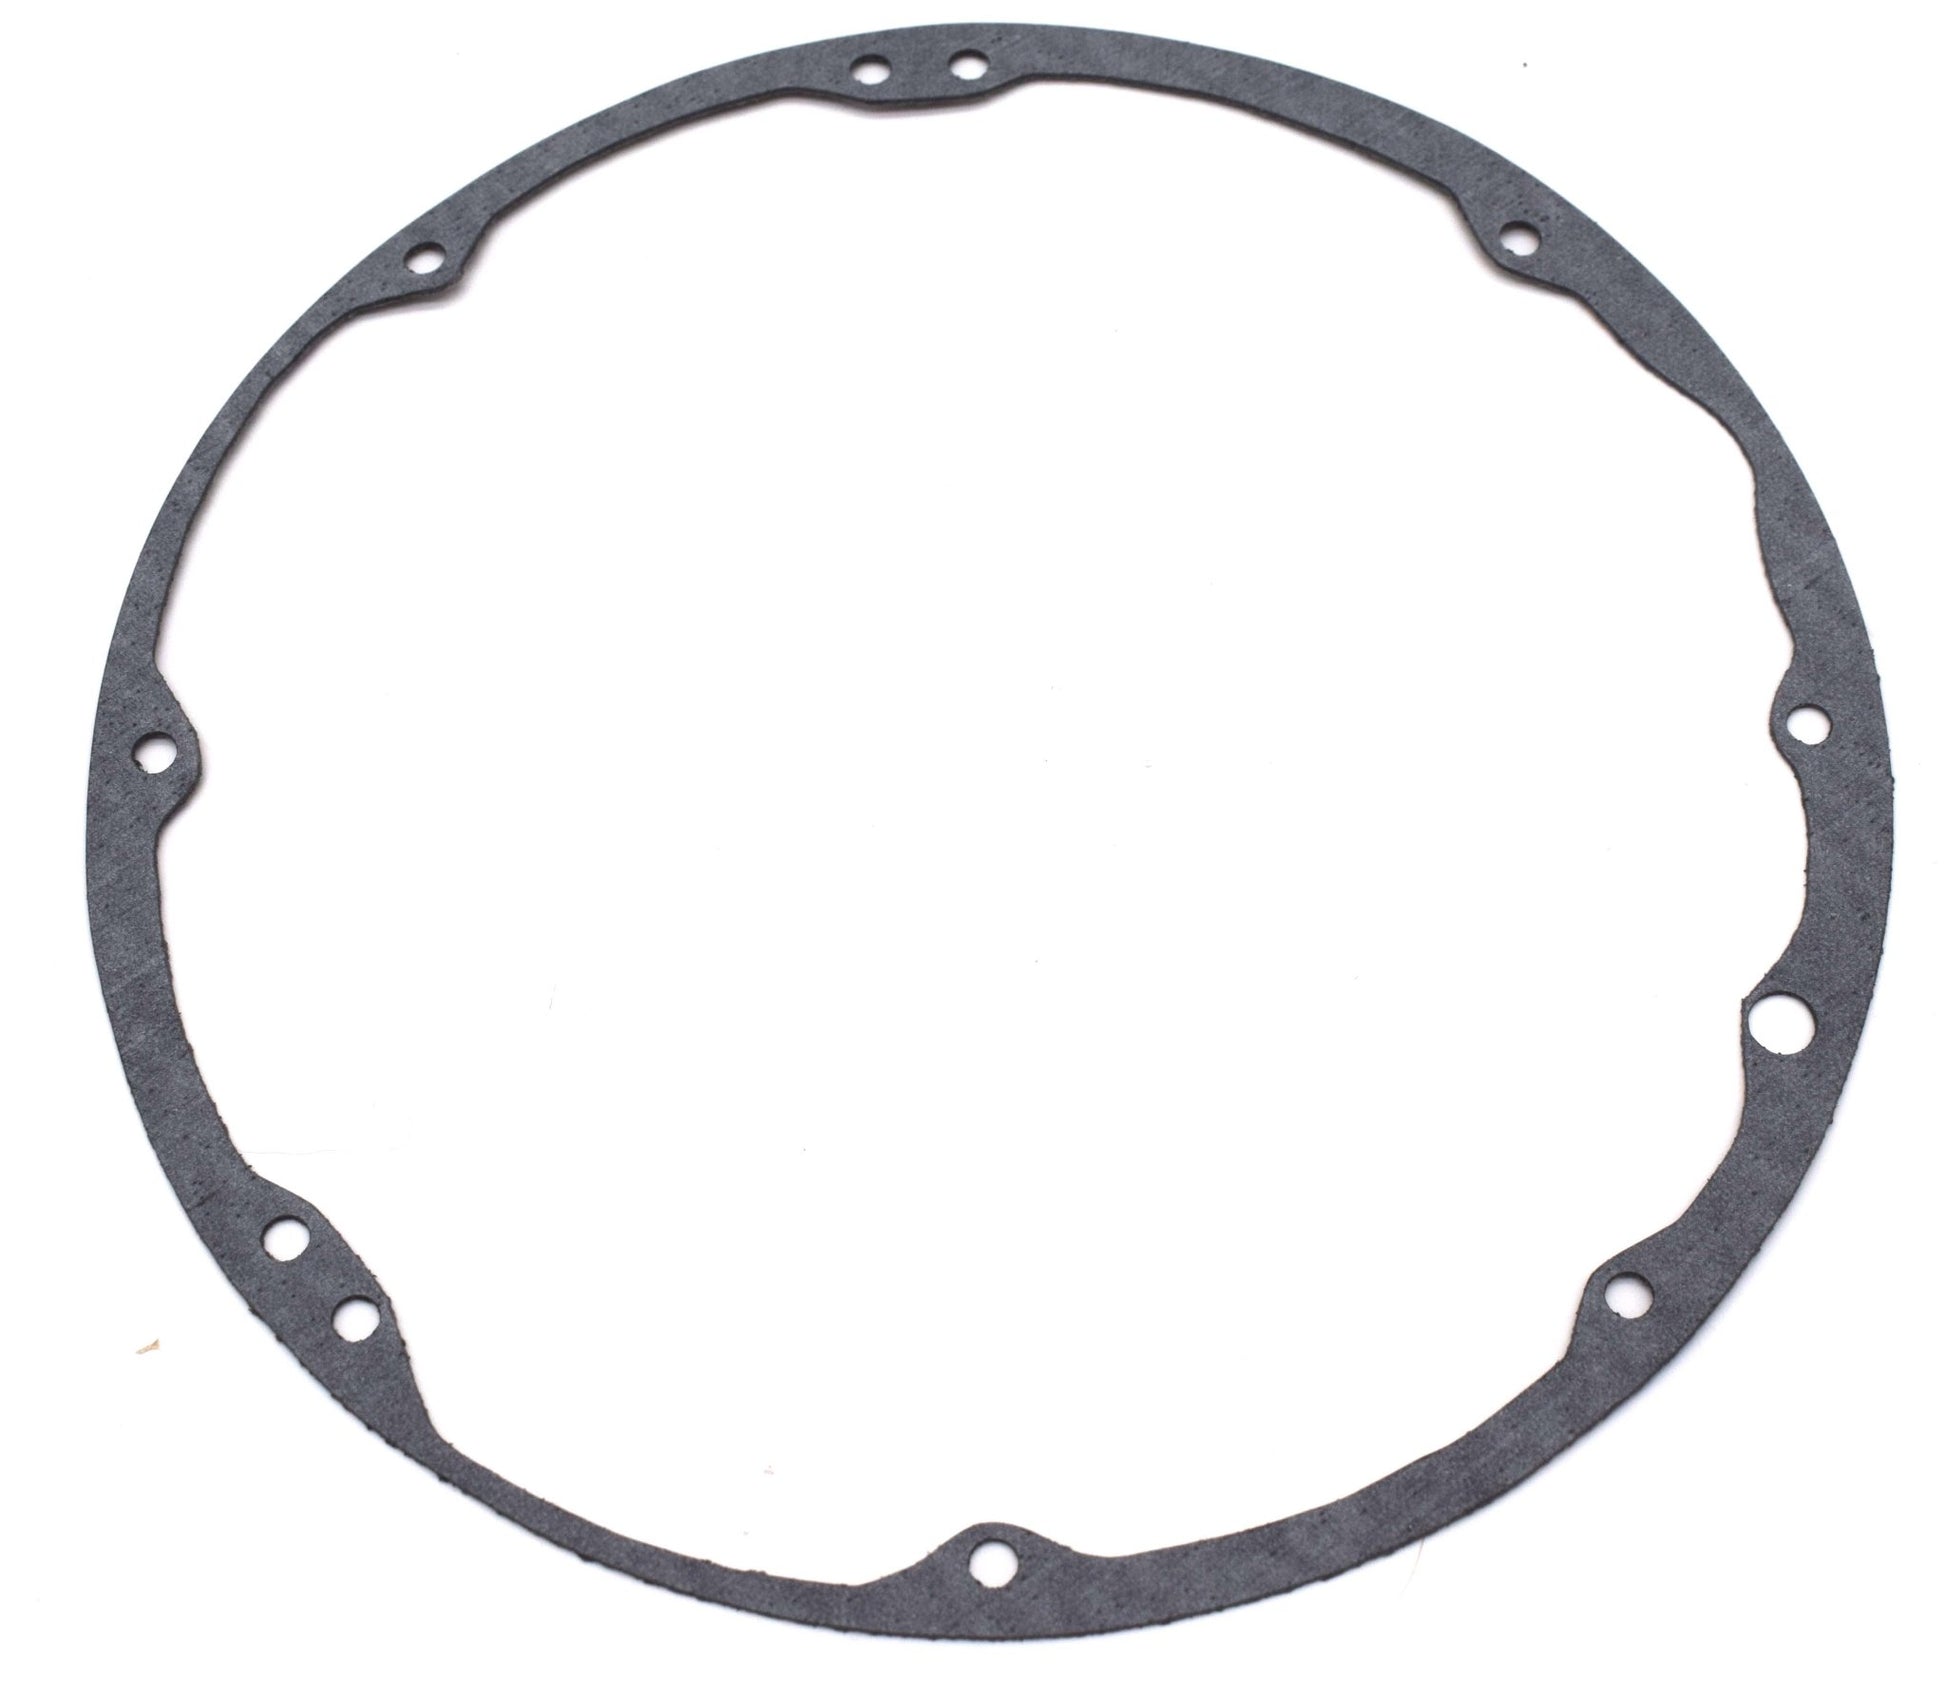 Headlight Gasket, 1945-1971, Willys and Jeep - The JeepsterMan